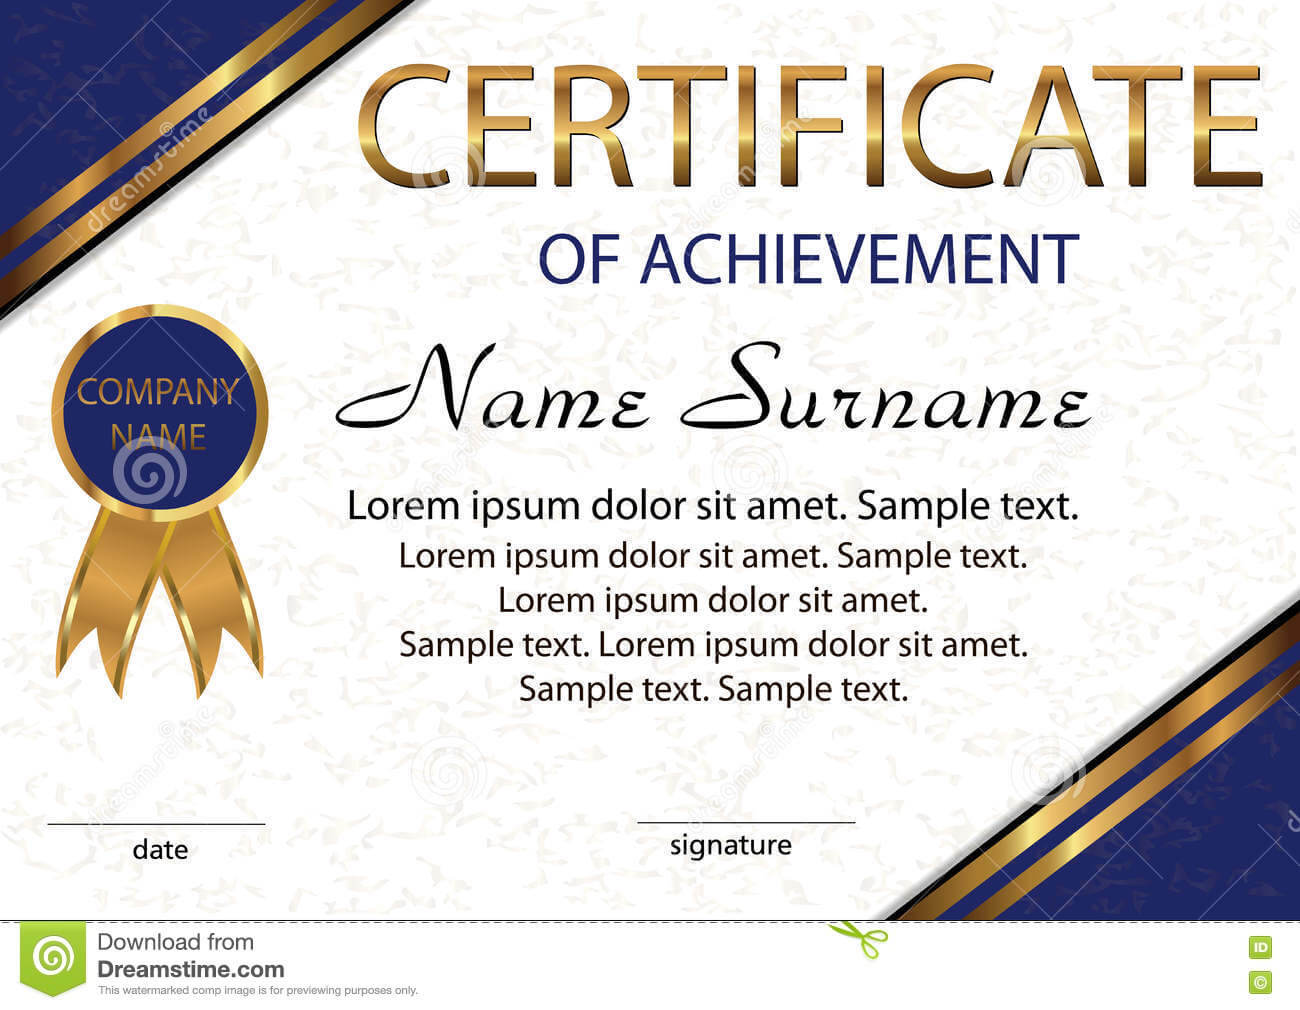 Certificate Of Achievement Or Diploma. Elegant Light Pertaining To Certificate Of Attainment Template